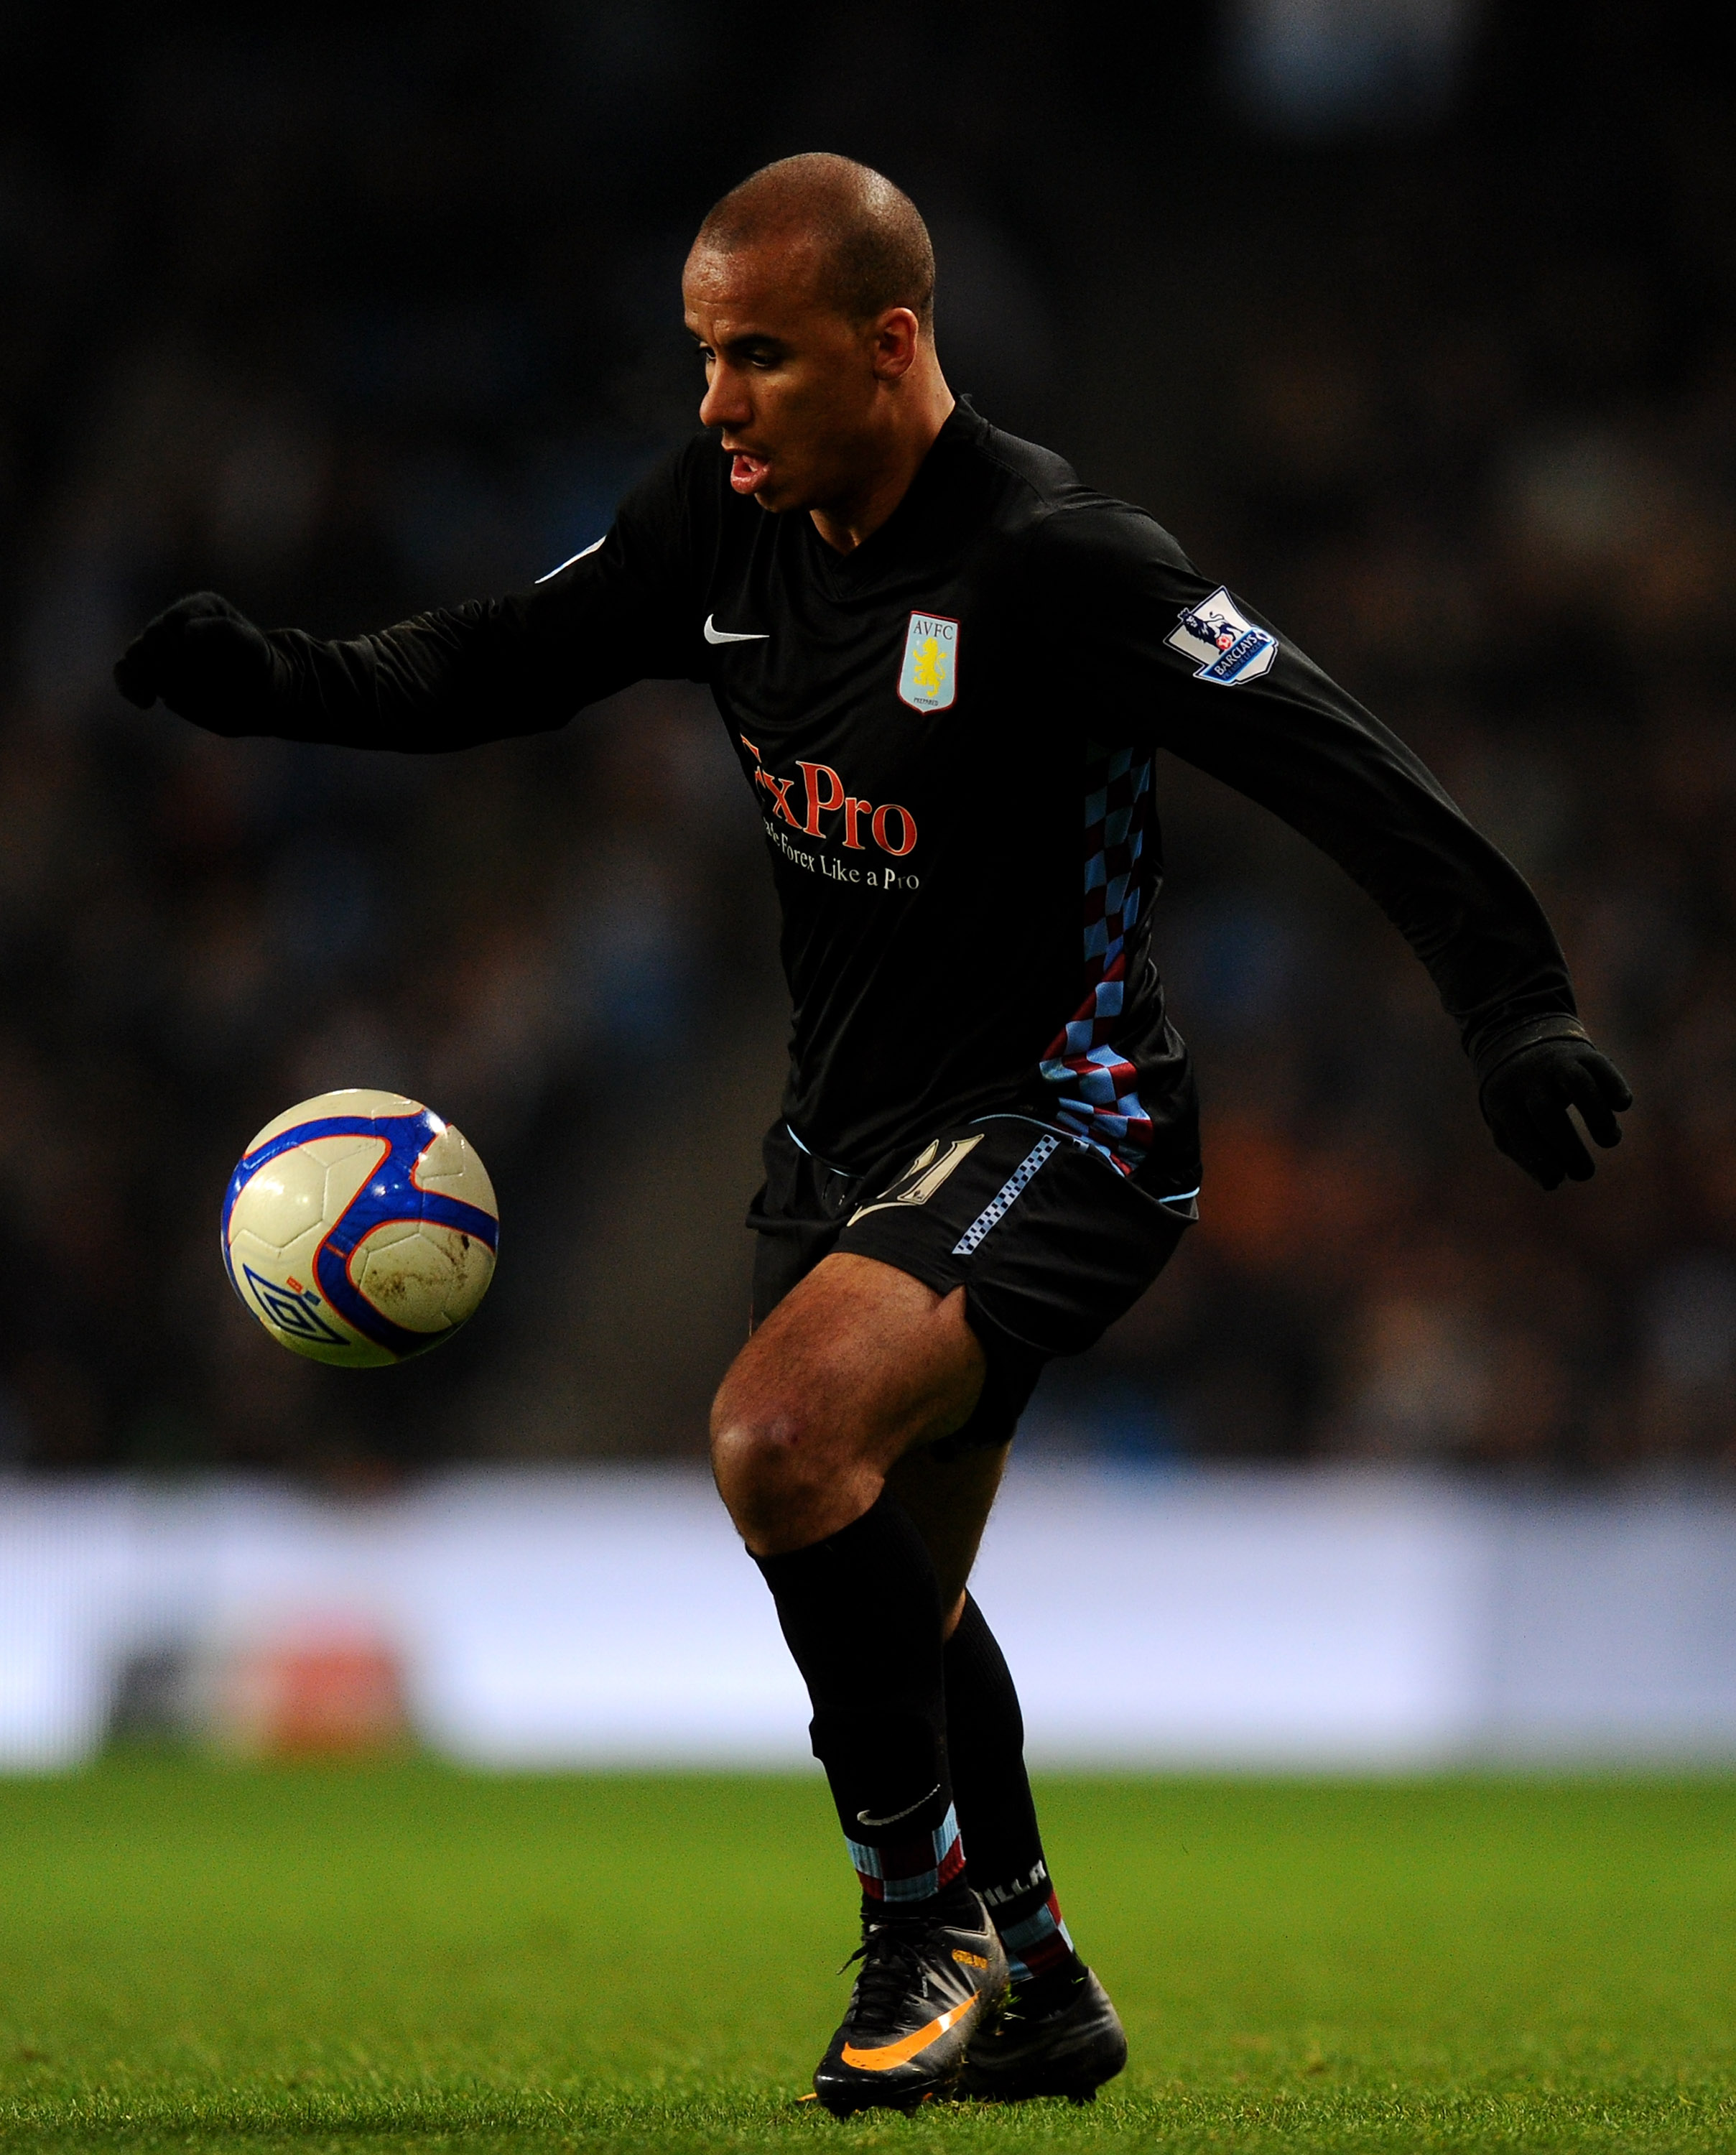 MANCHESTER, ENGLAND - MARCH 02:   Gabriel Agbonlahor of Aston Villa in action during the FA Cup sponsored by E.On Fifth Round match between Manchester City and Aston Villa at the City of Manchester Stadium on March 2, 2011 in Manchester, England.  (Photo